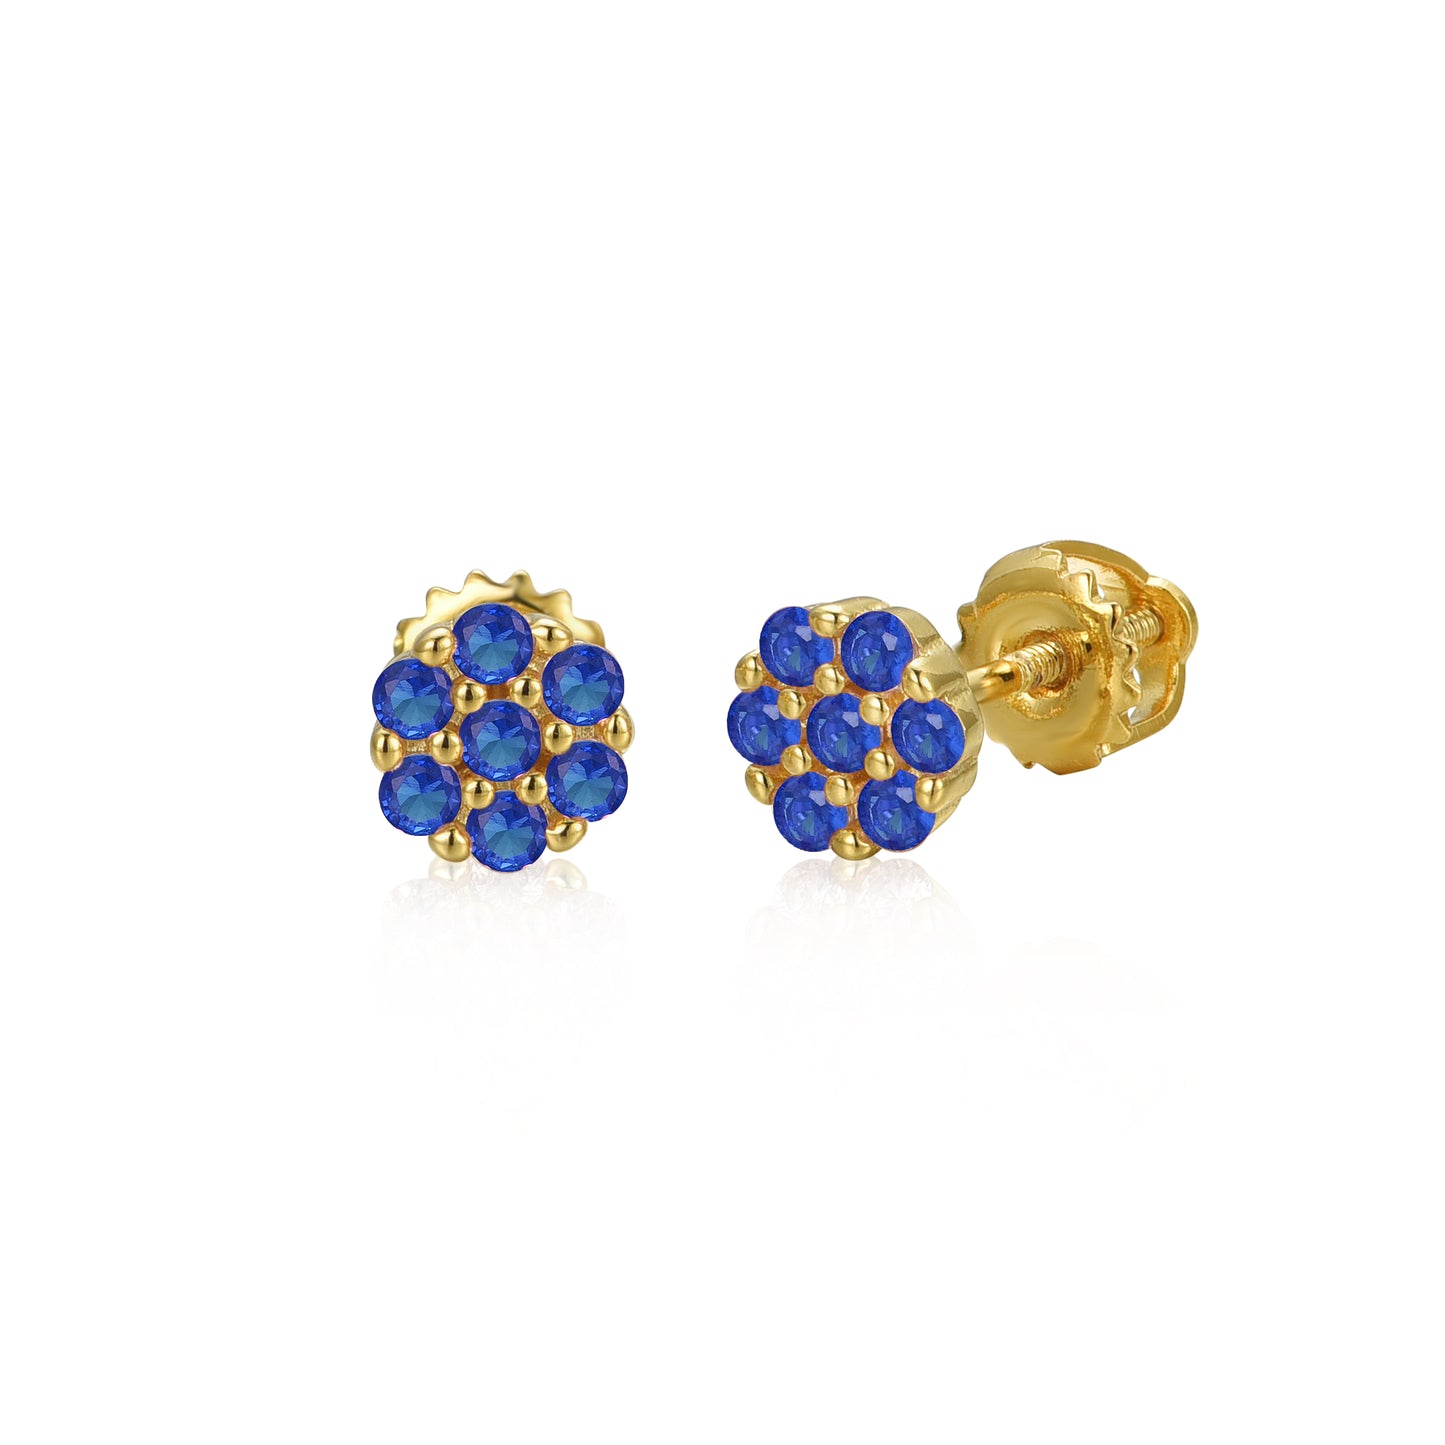 Surgical Steel Small CZ 5 Stone Stud Earrings